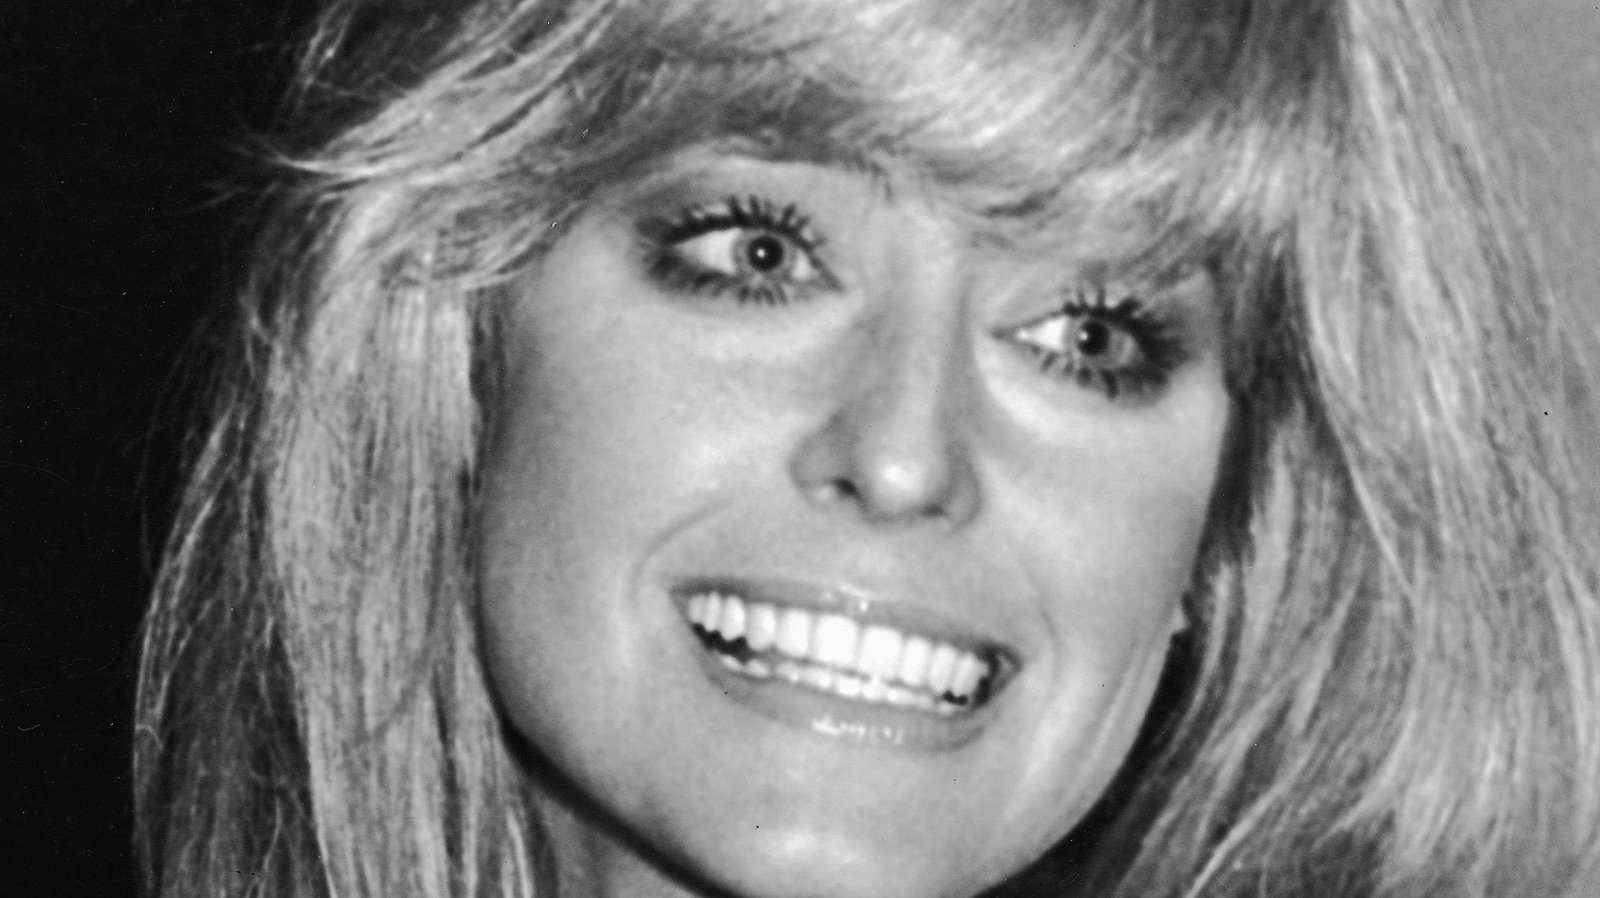 Farrah Fawcett's Prized Possession Had Controversy Booming After Her Death